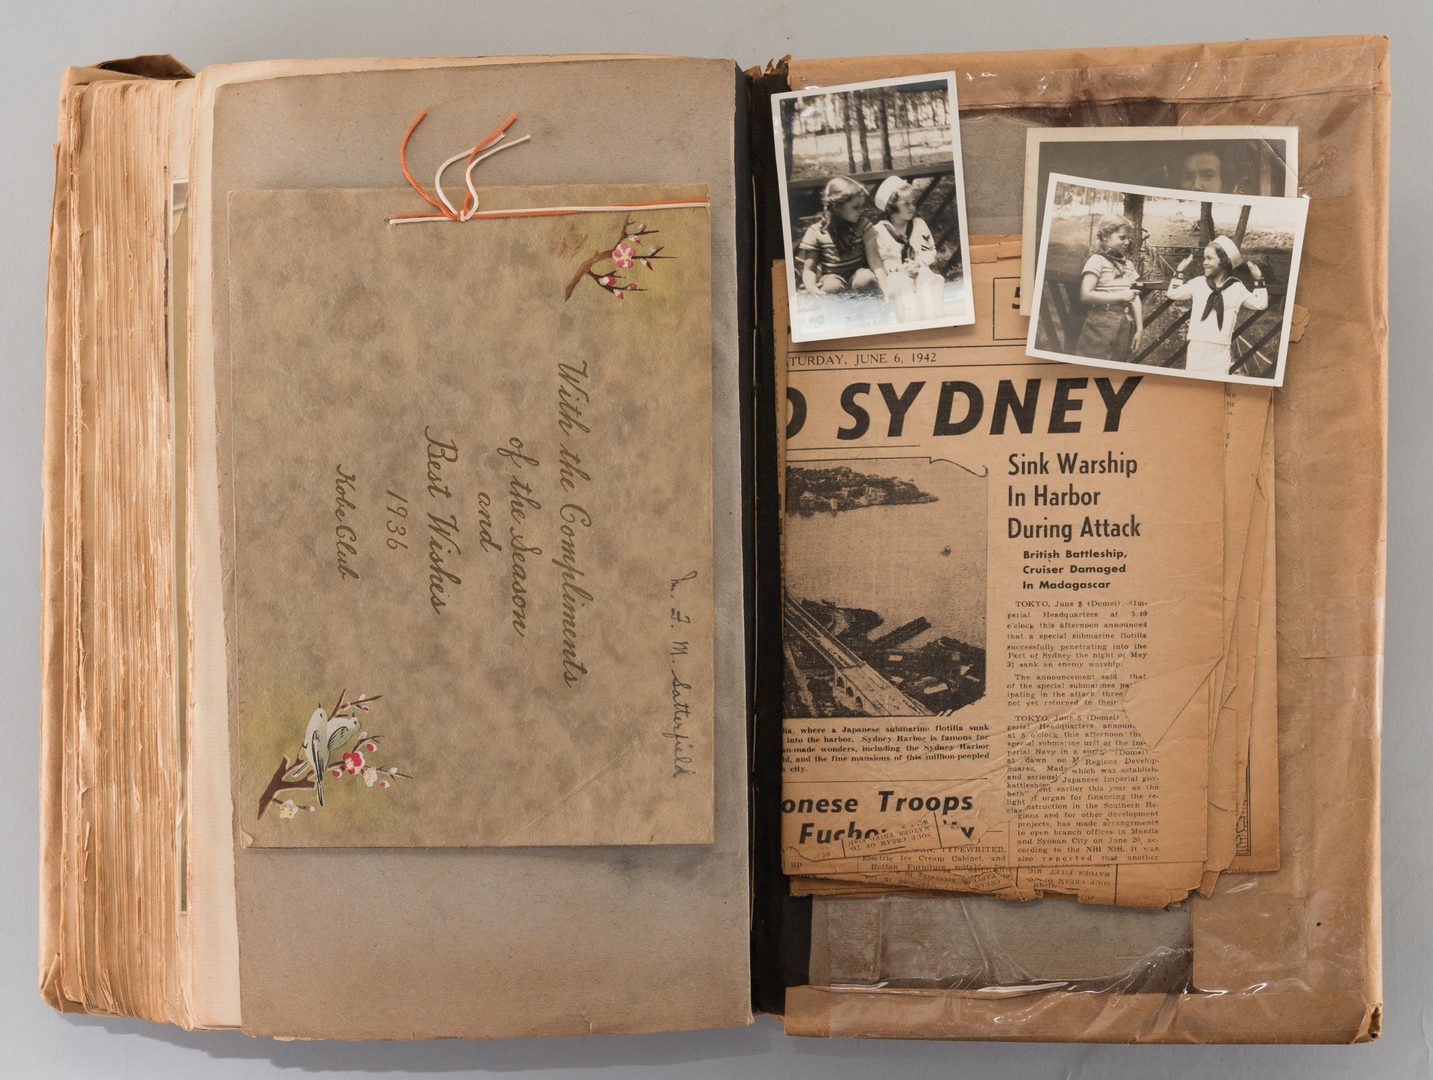 Lot 40: Diary of Far East Travels 1924-1944